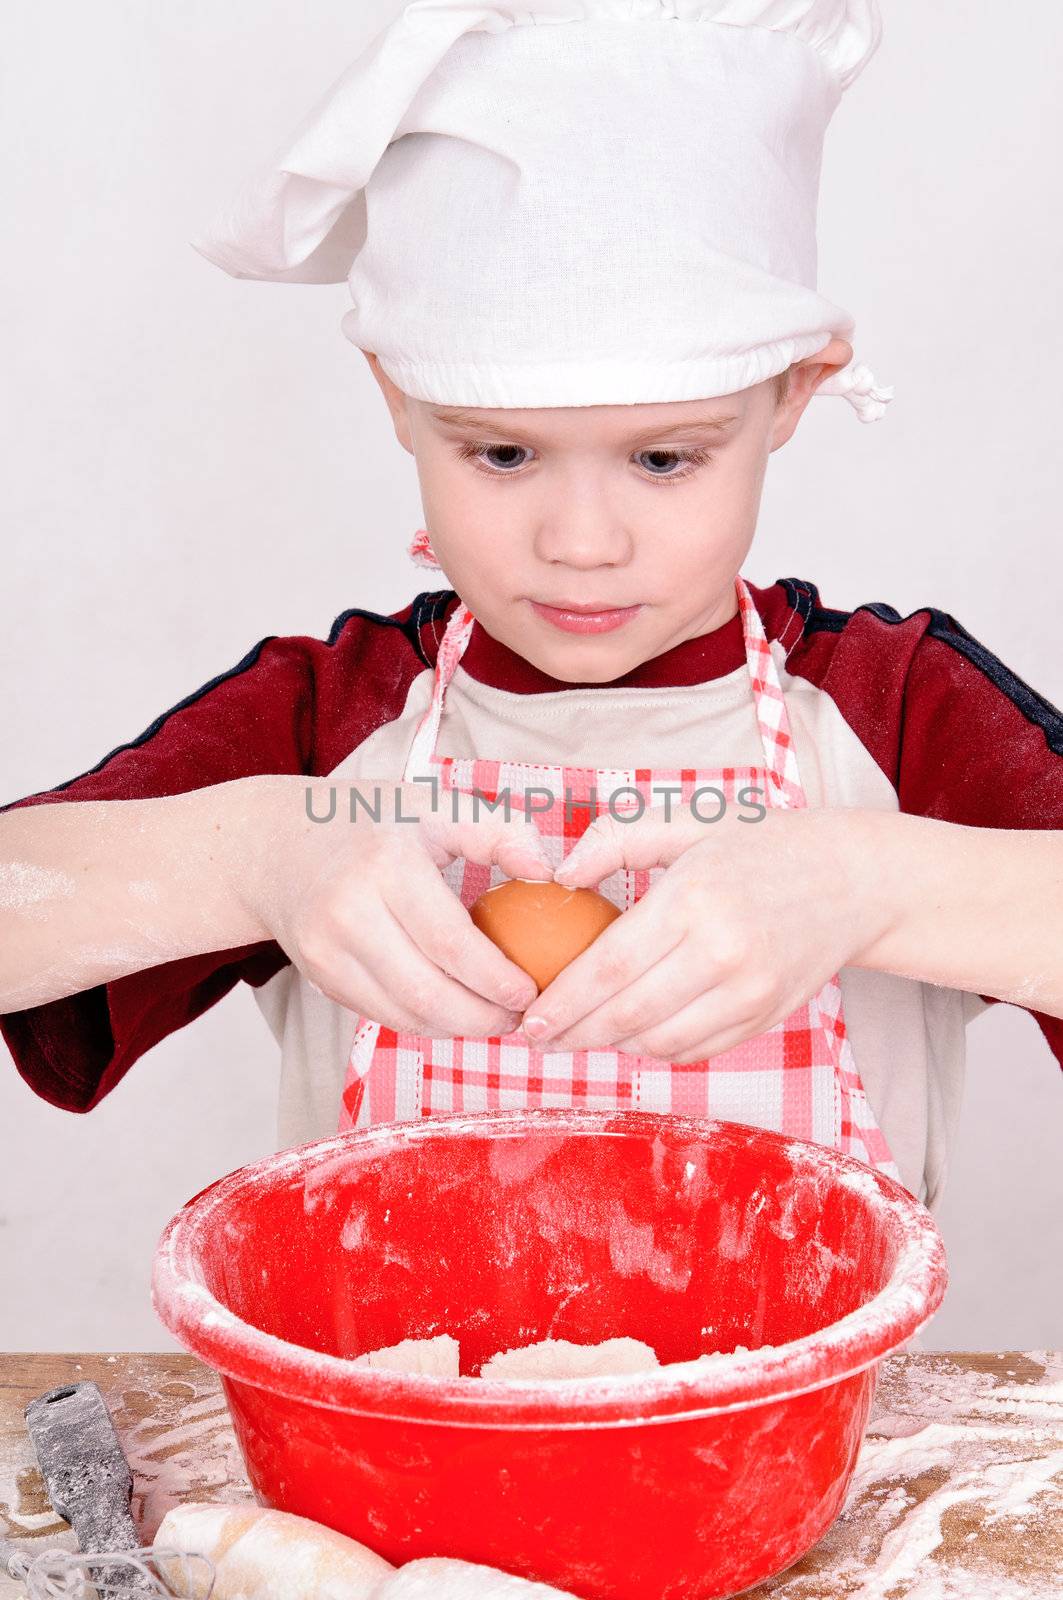 boy in chef hat knead the dough